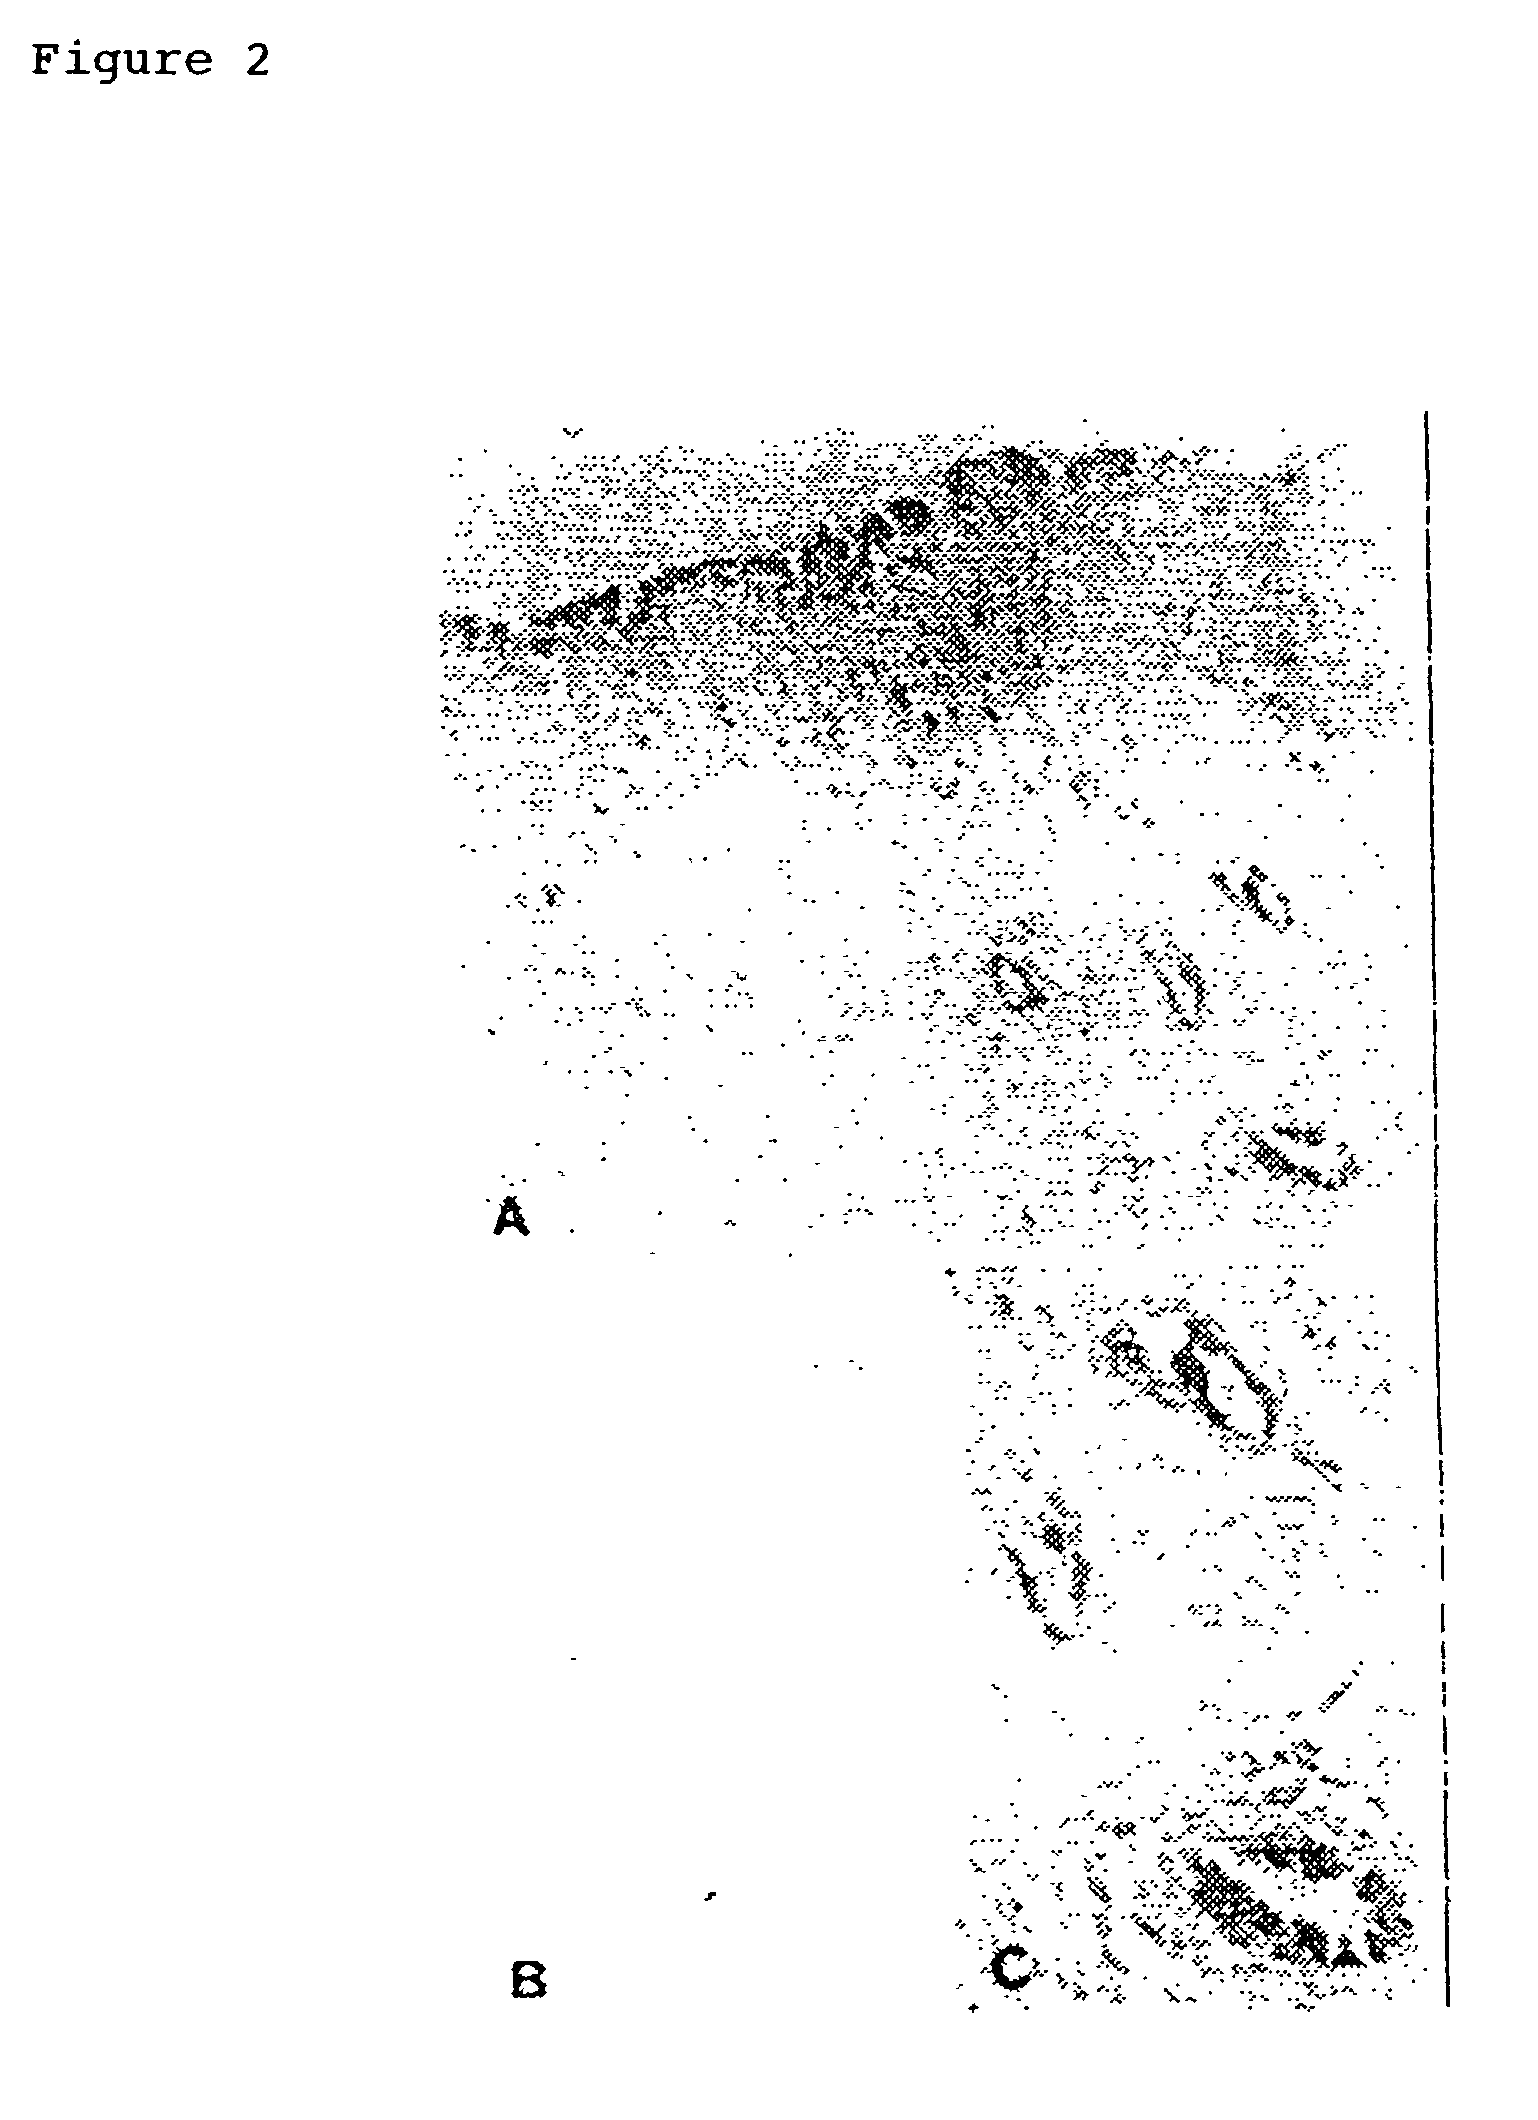 Agents comprising midkine or an inhibitor thereof as active ingredient